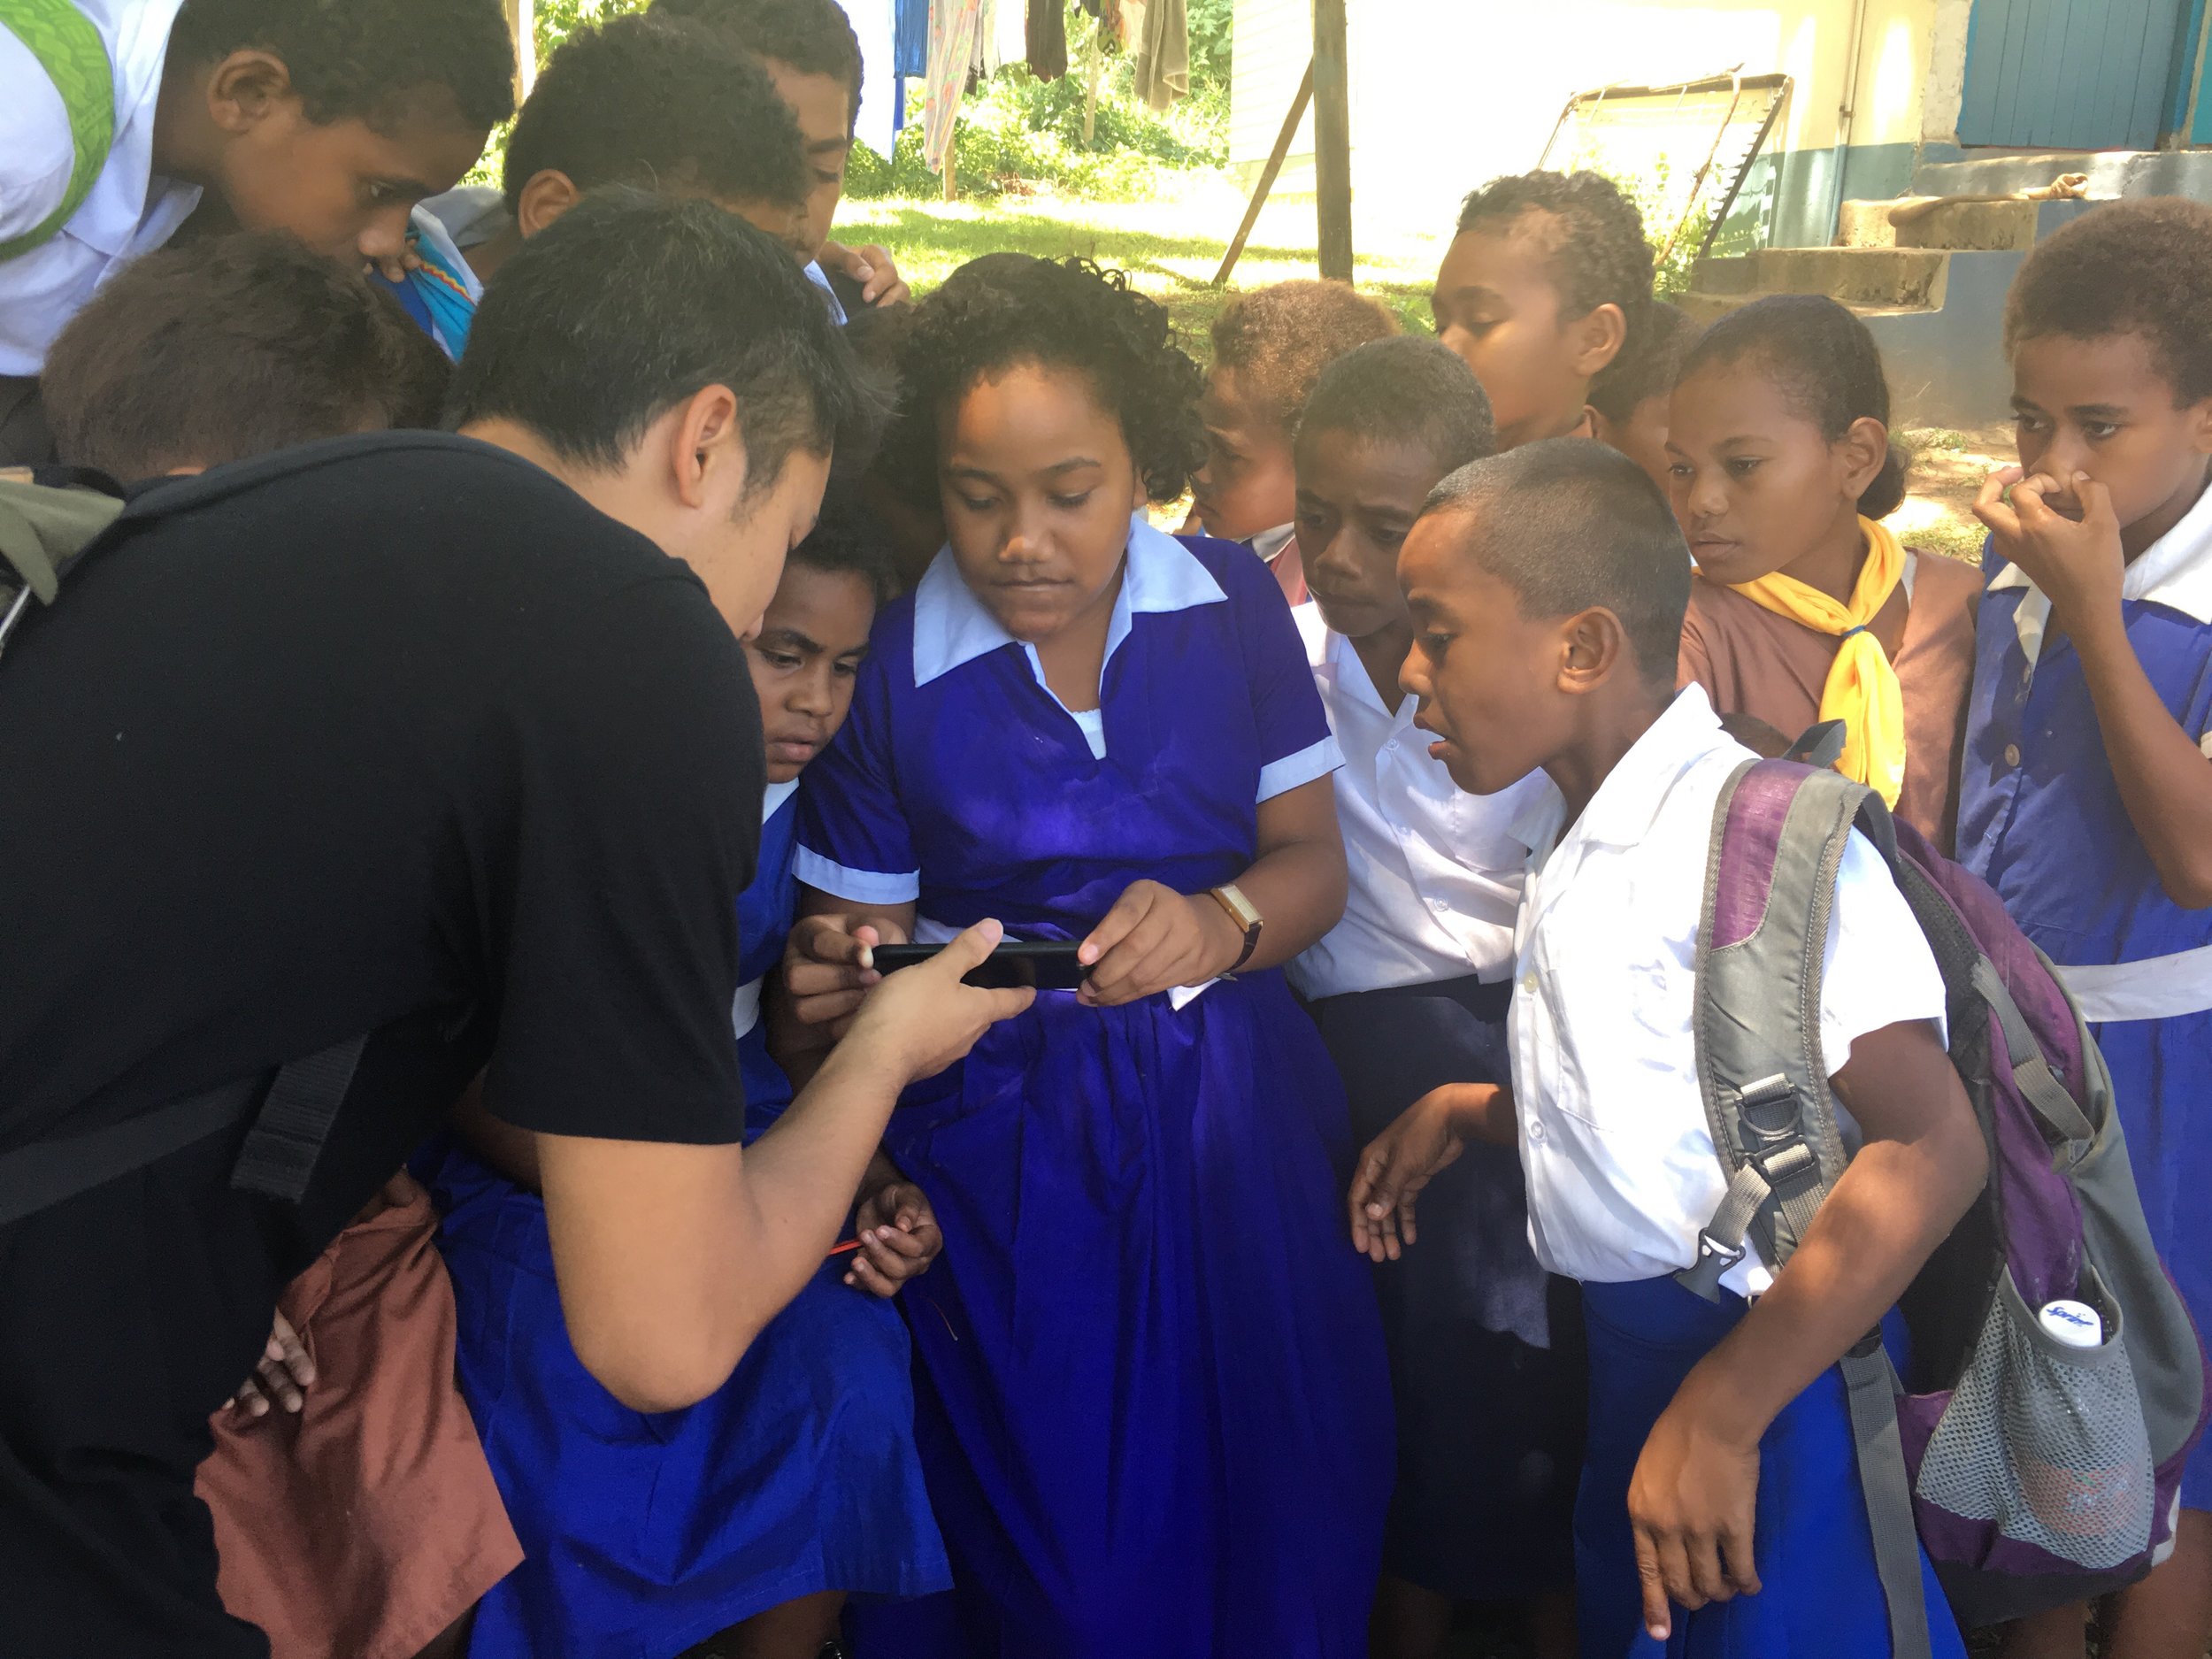 Producer Tash Tan of S1T2 sharing an AR demo to school students on a LAUNCH Legends field reporting trip to Fiji photo by Rob Oliver 